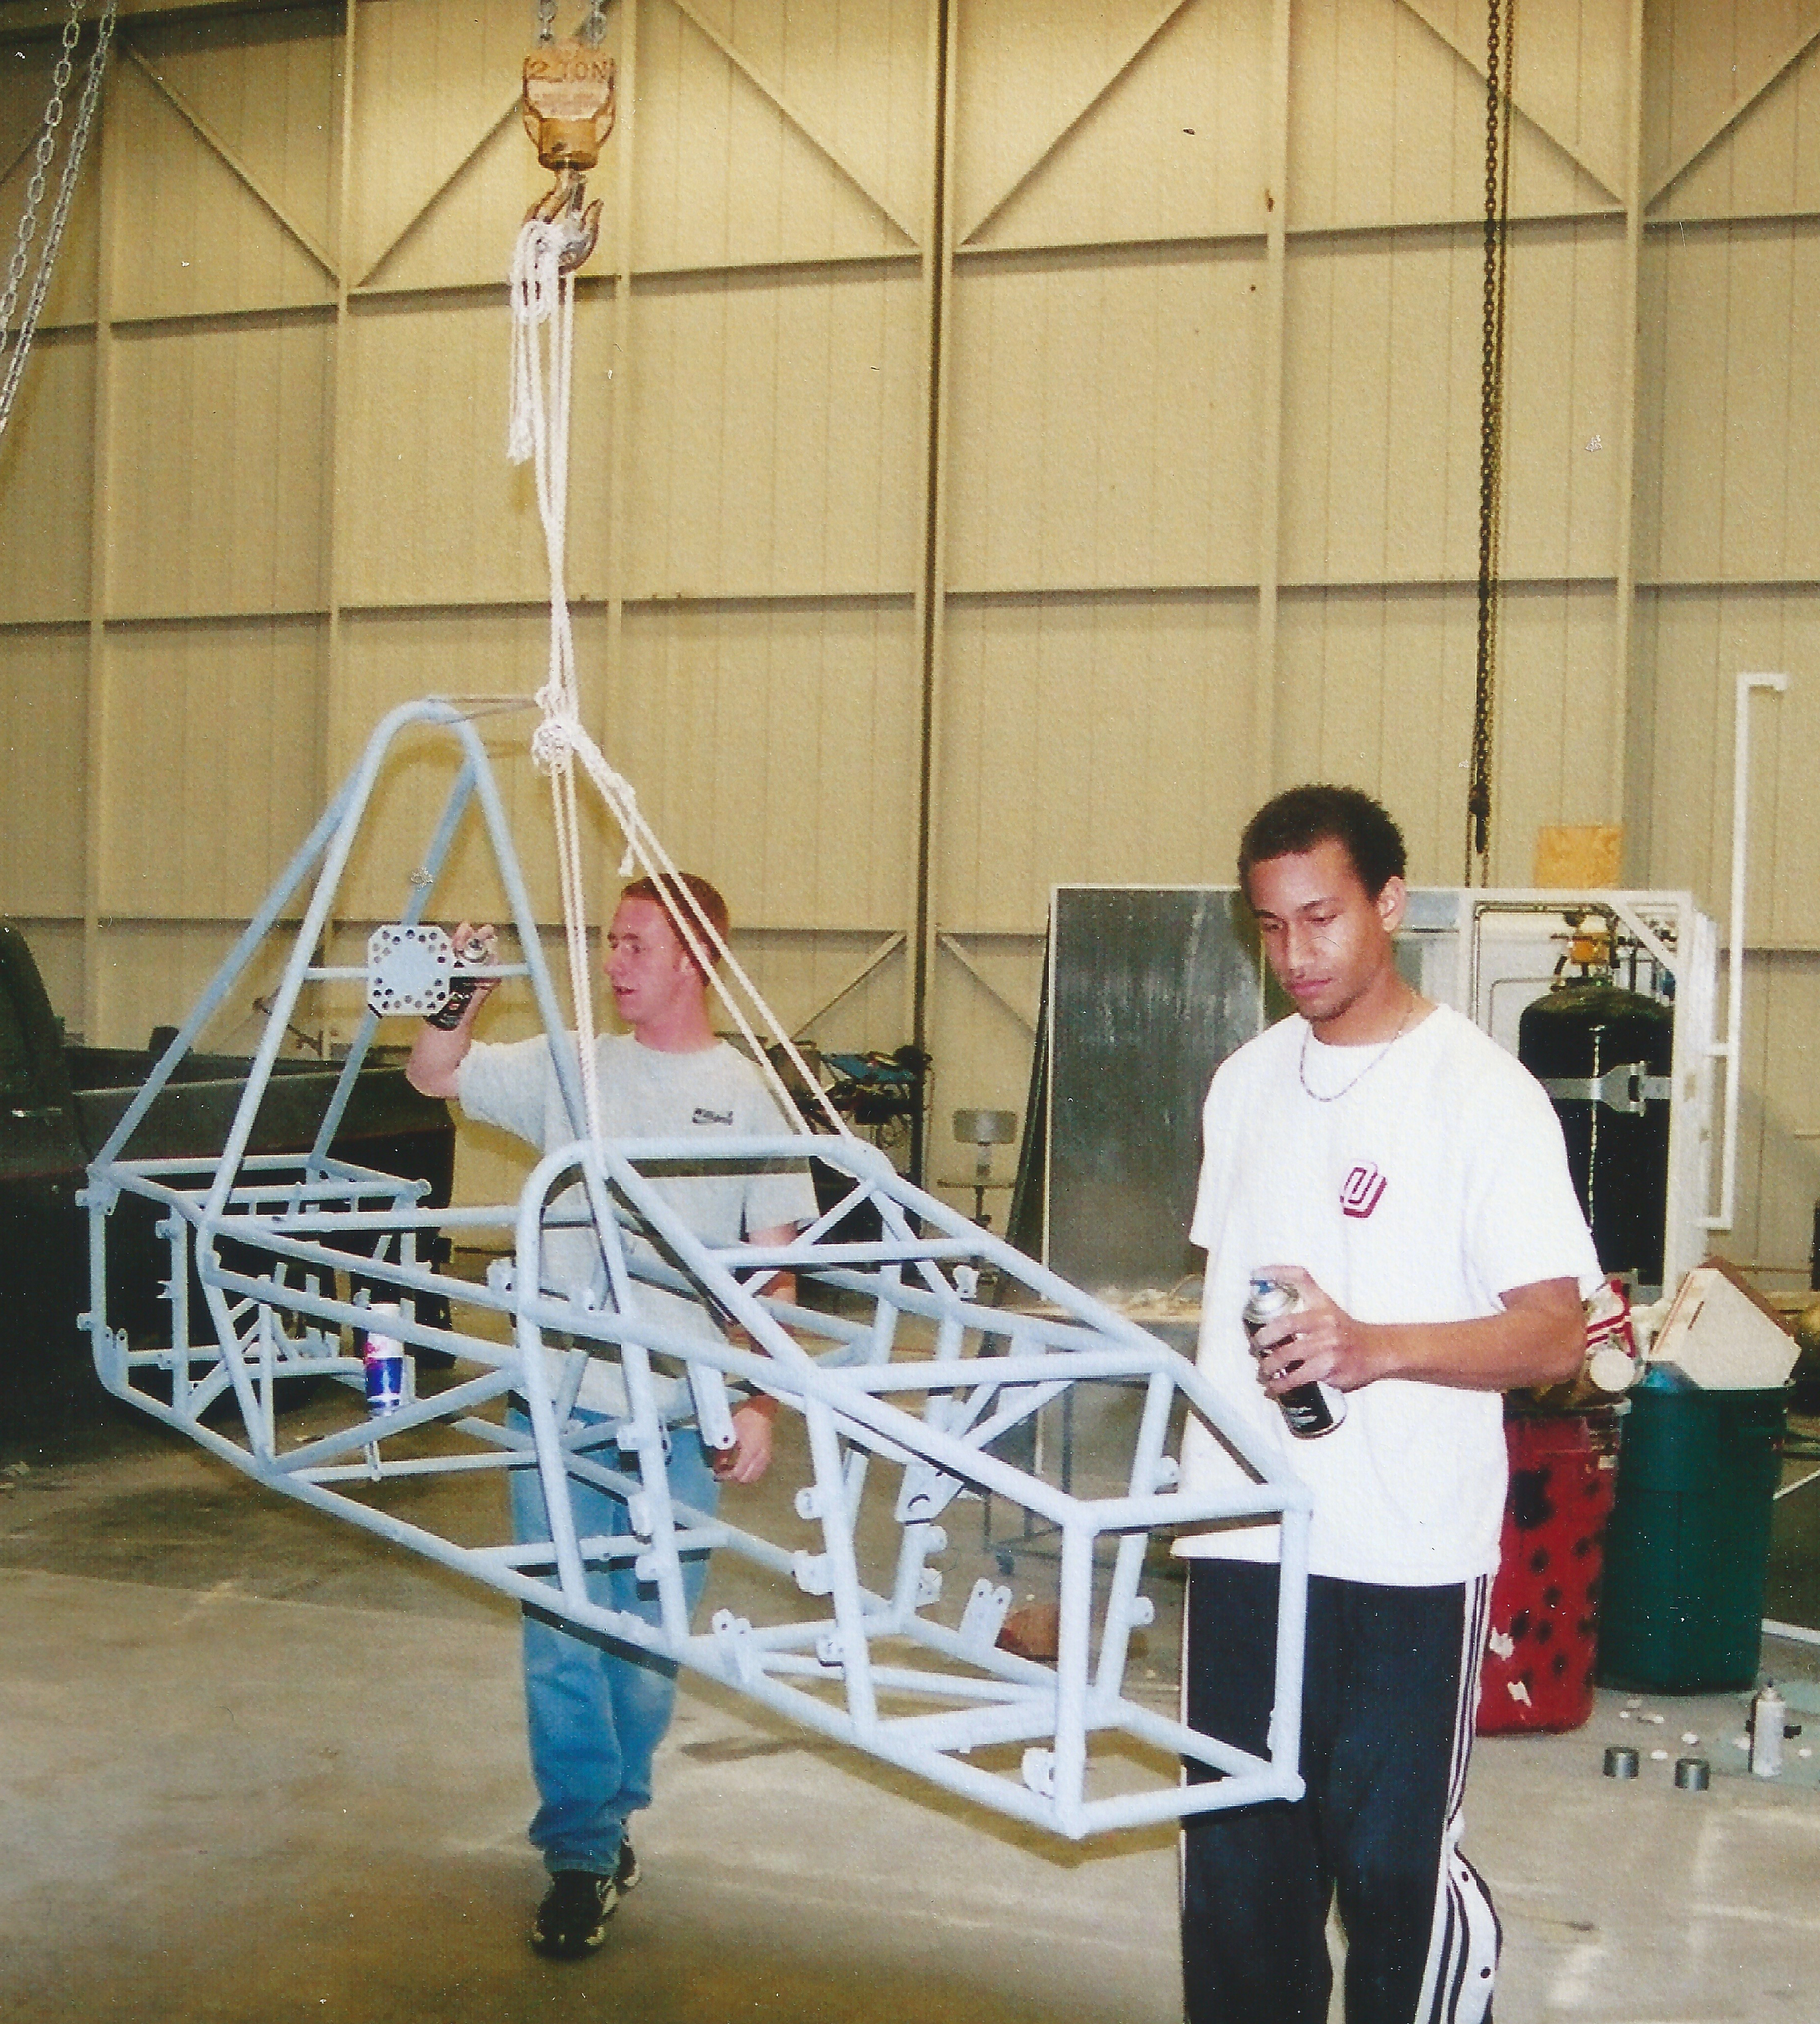 Devin (pictured right) and teammate working on the Sooner Racing Team car in 2001.